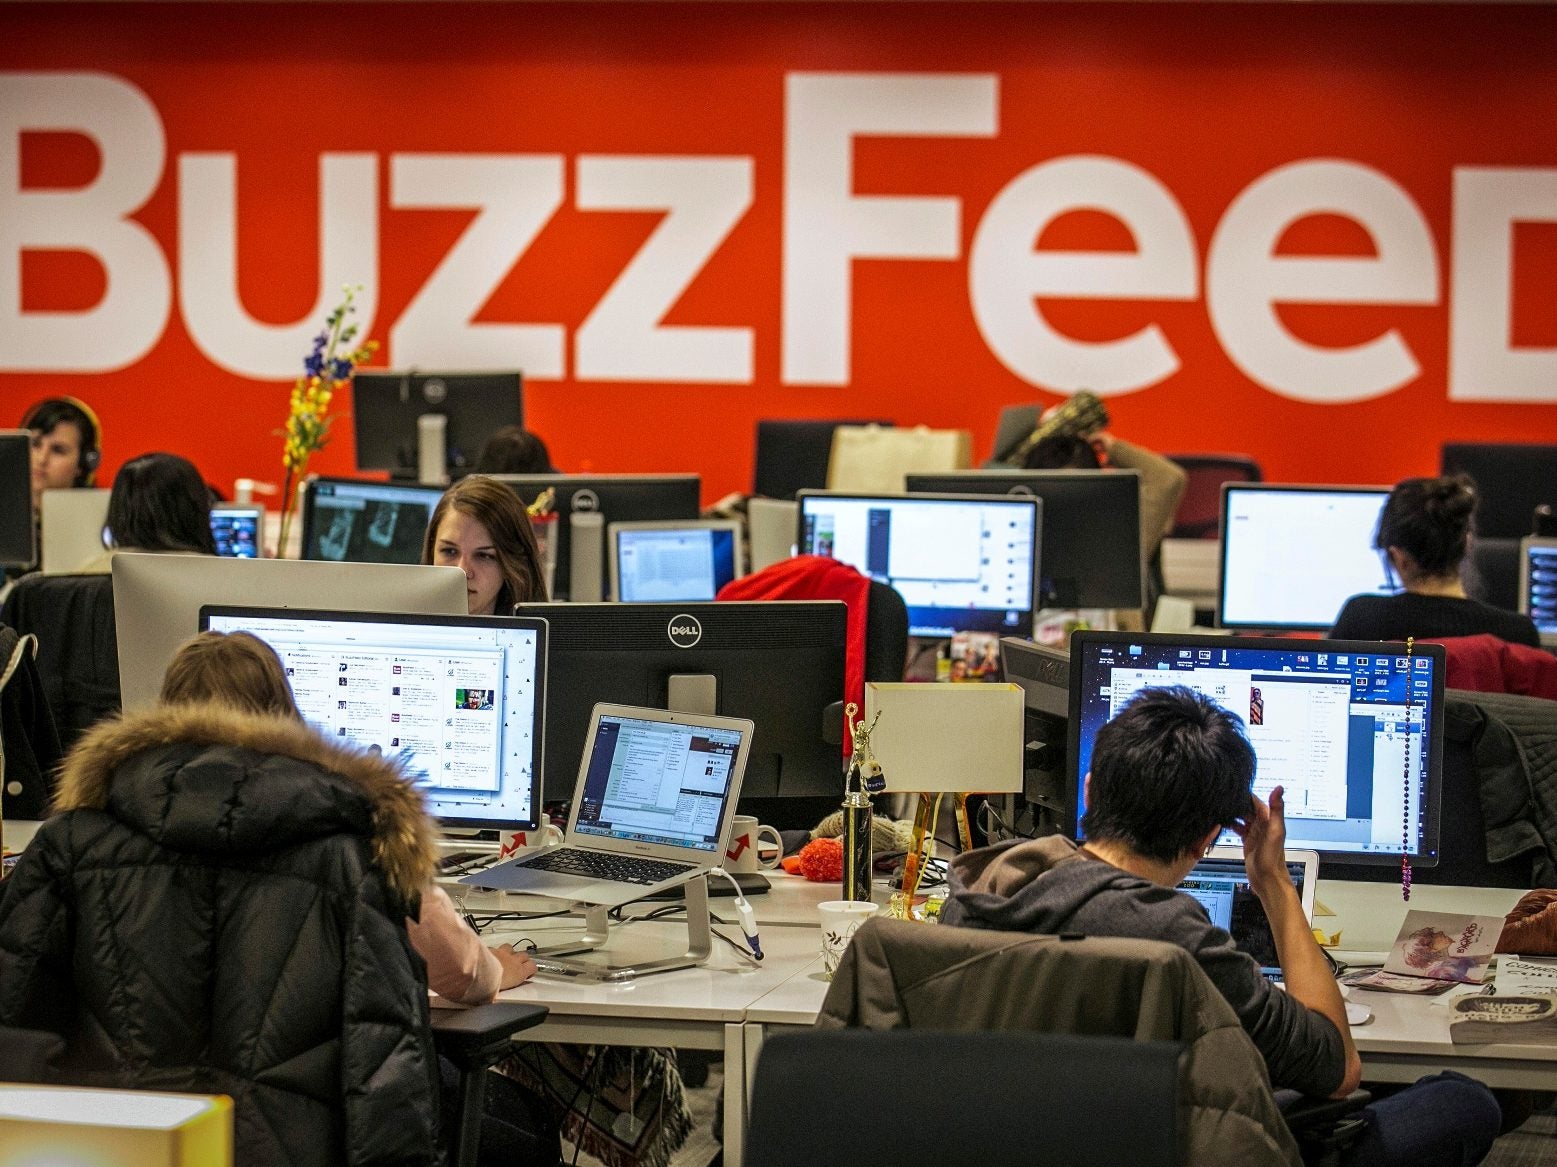 From unlimited oysters to redundancies: WTF happened at Buzzfeed in the UK?